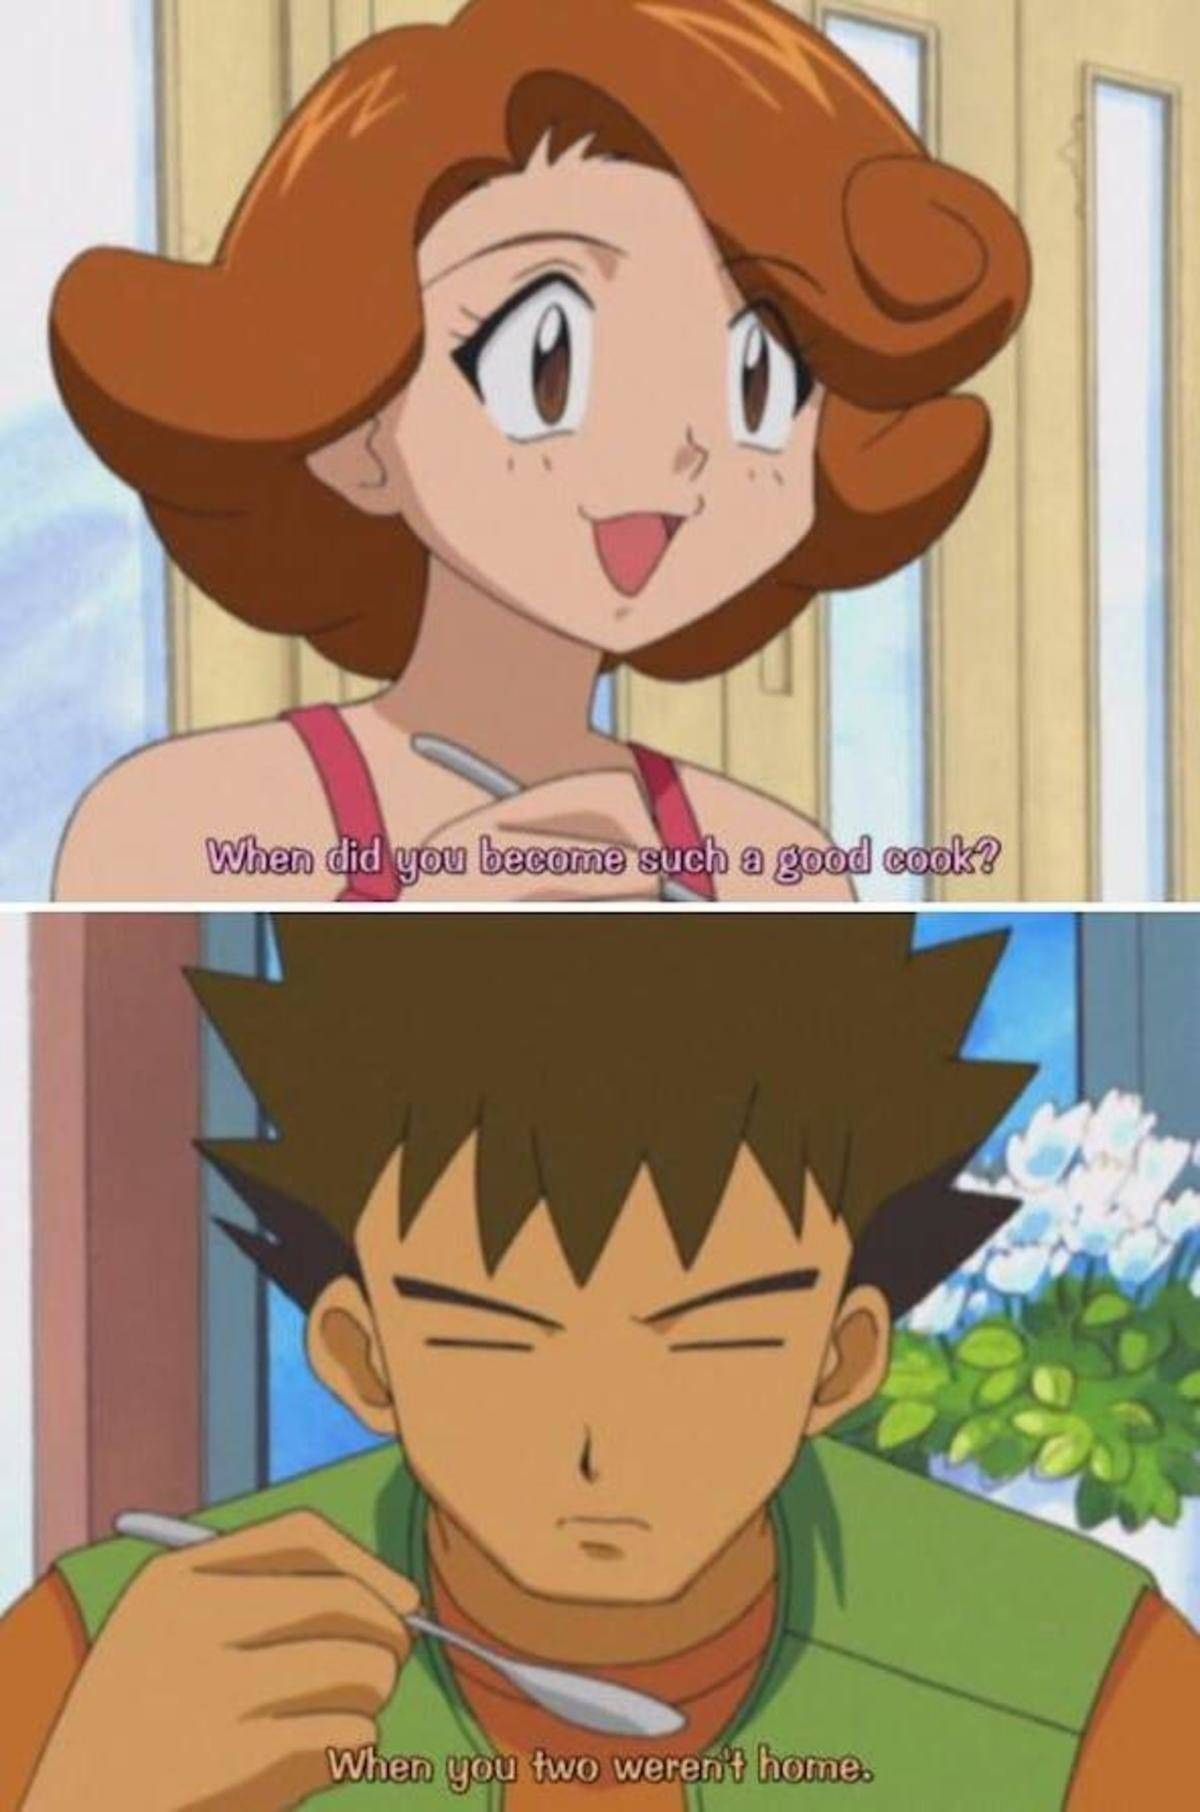 brock's mom - When did you become such a good cook? When you two weren't home.